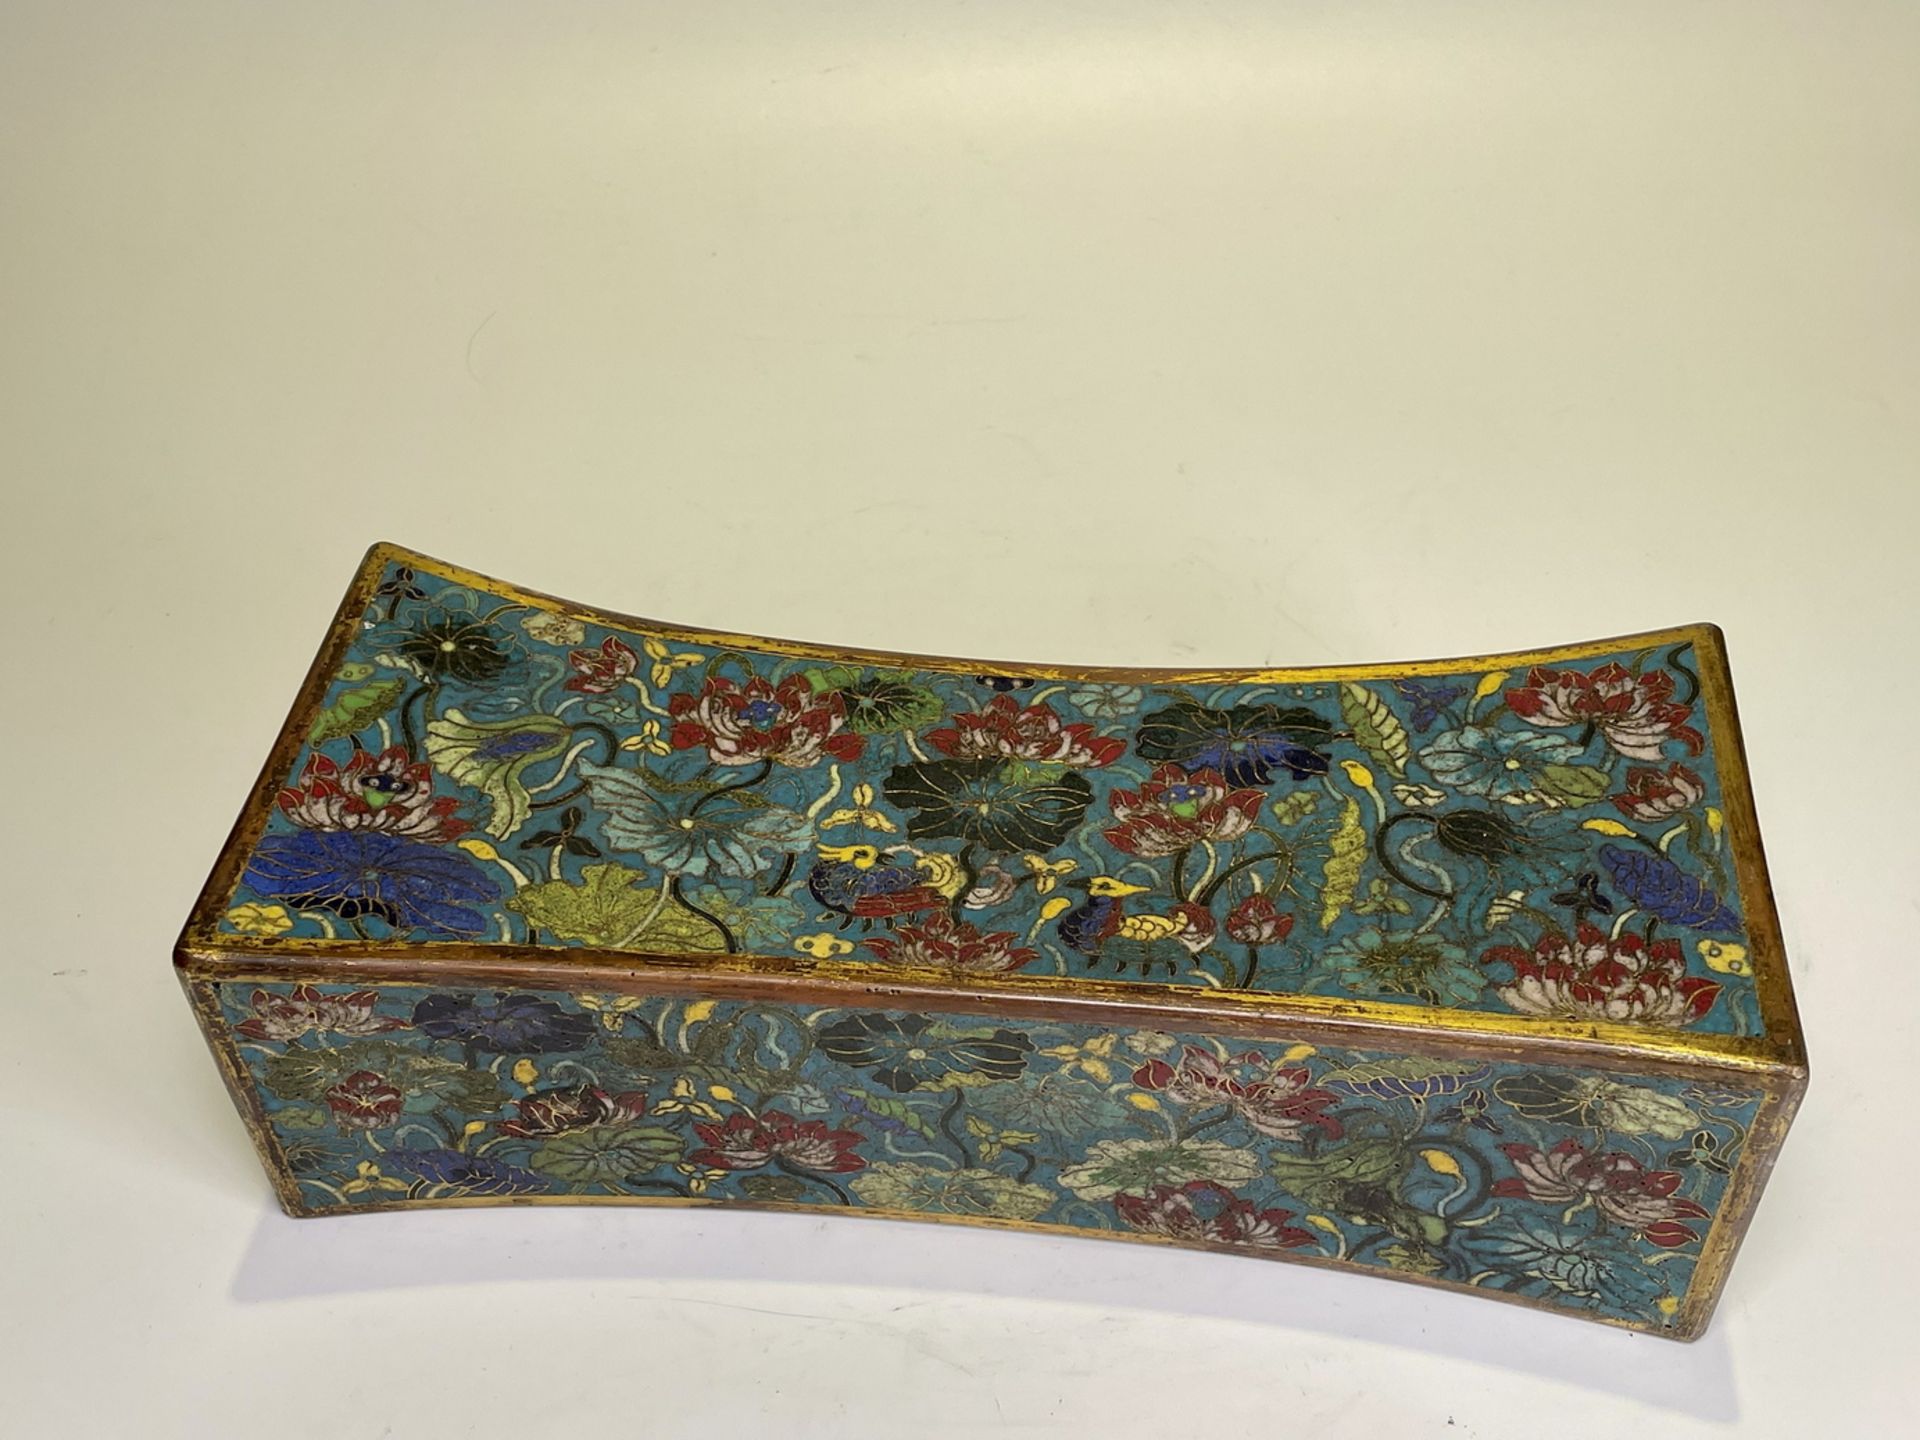 FINE CHINESE CLOISONNE, 17TH/18TH Century Pr.  Collection of NARA private gallary.  - Image 2 of 7